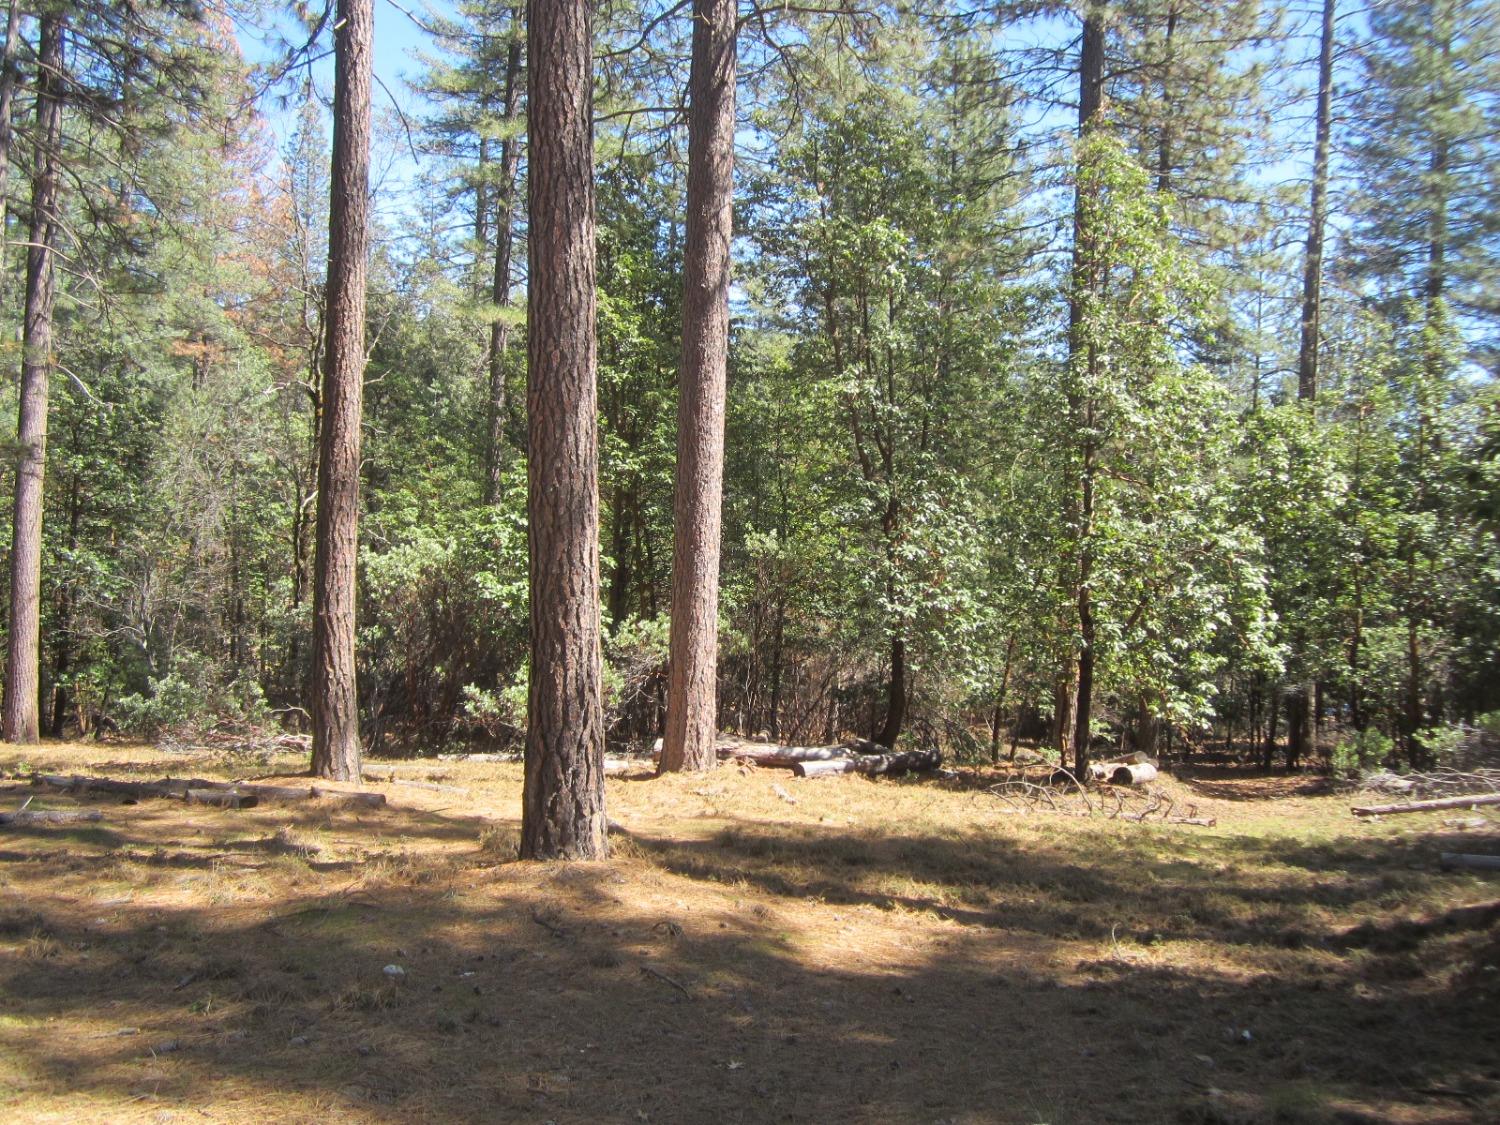 Photo of 6503 Deer Canyon Ct in Placerville, CA